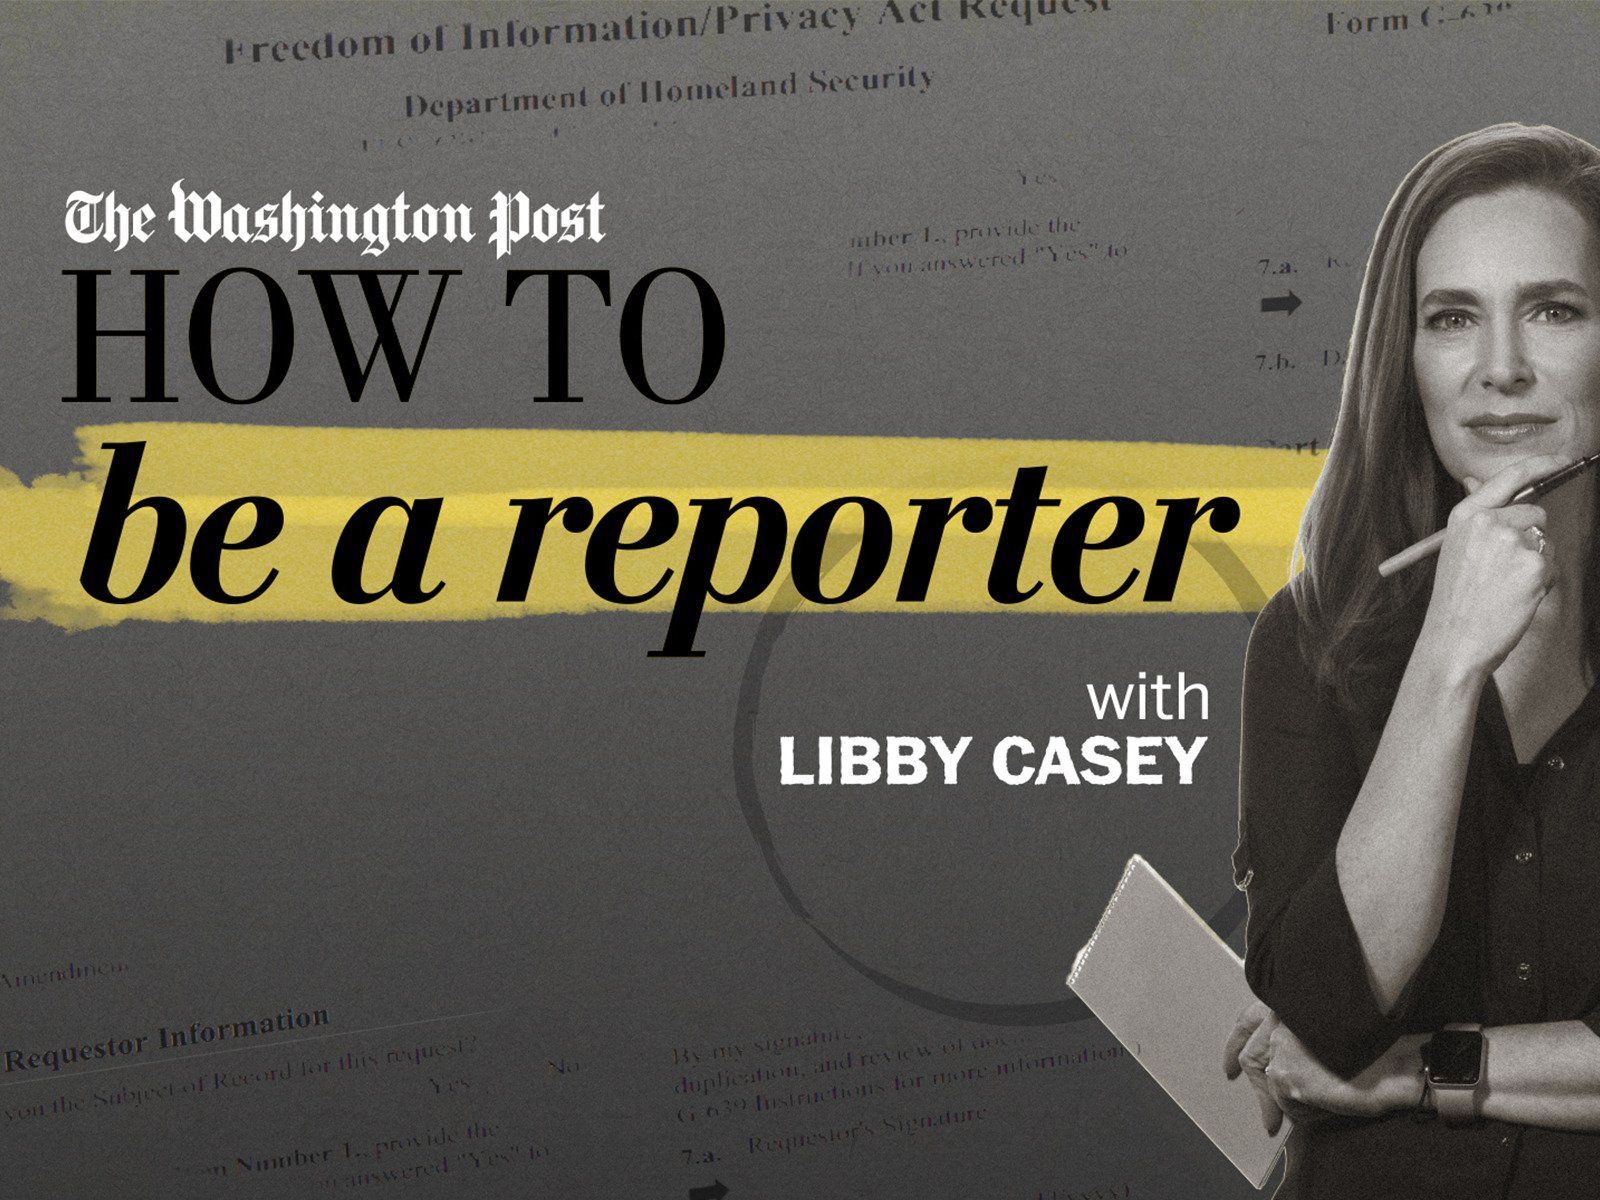 How to be a journalist